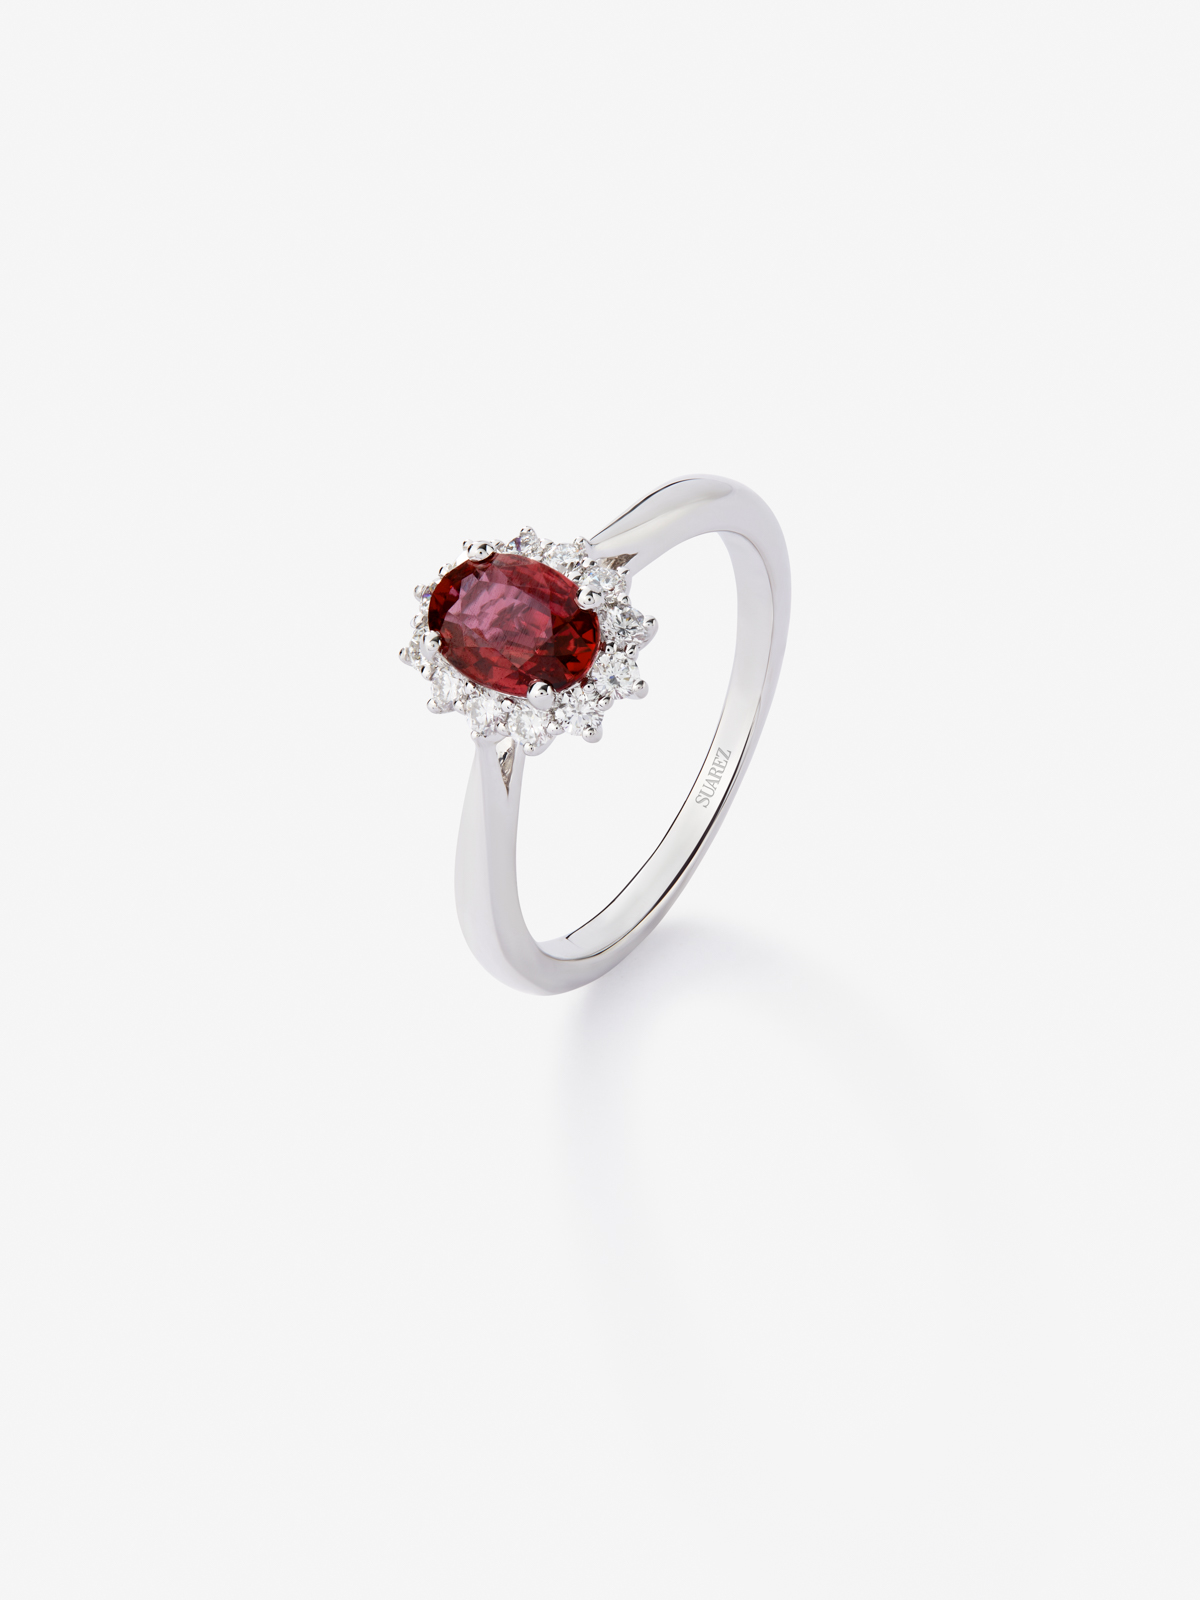 18K White Gold Ring with Red Red Vivid in Oval size of 1 cts and white diamonds in bright size of 0.26 cts